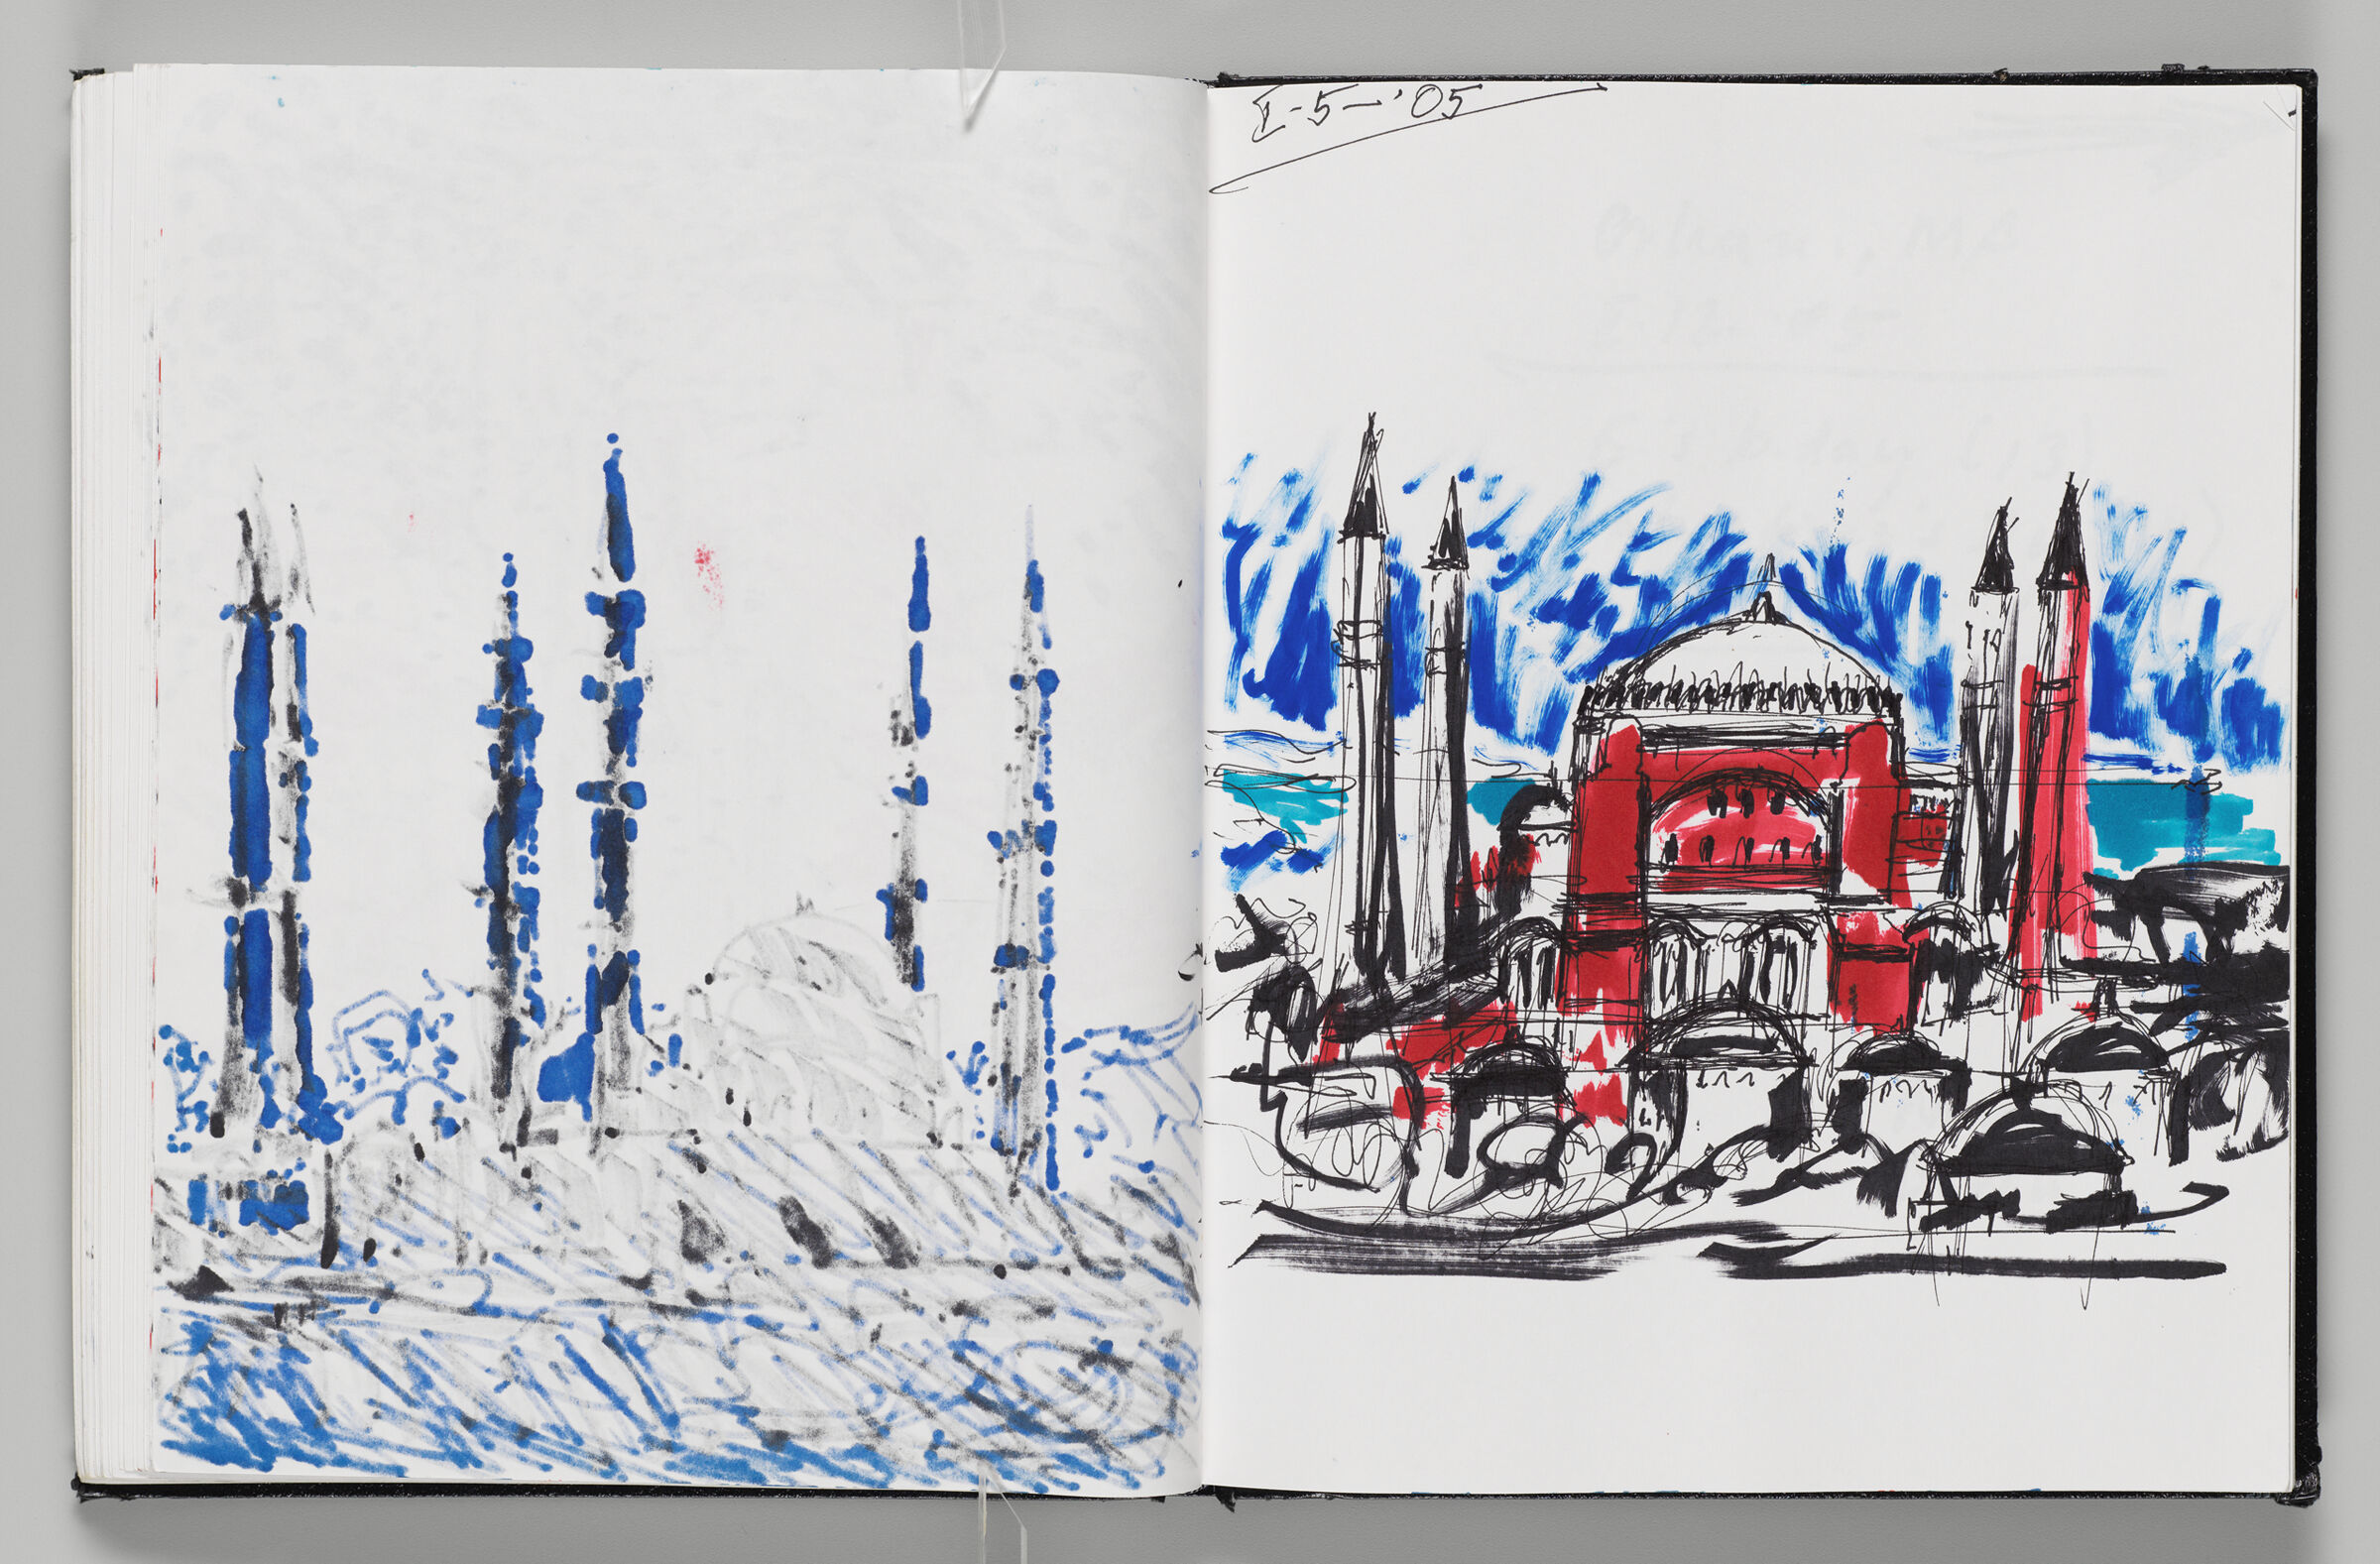 Untitled (Bleed-Through Of Previous Page, Left Page); Untitled (View Of Mosque With Minarets, Right Page)
